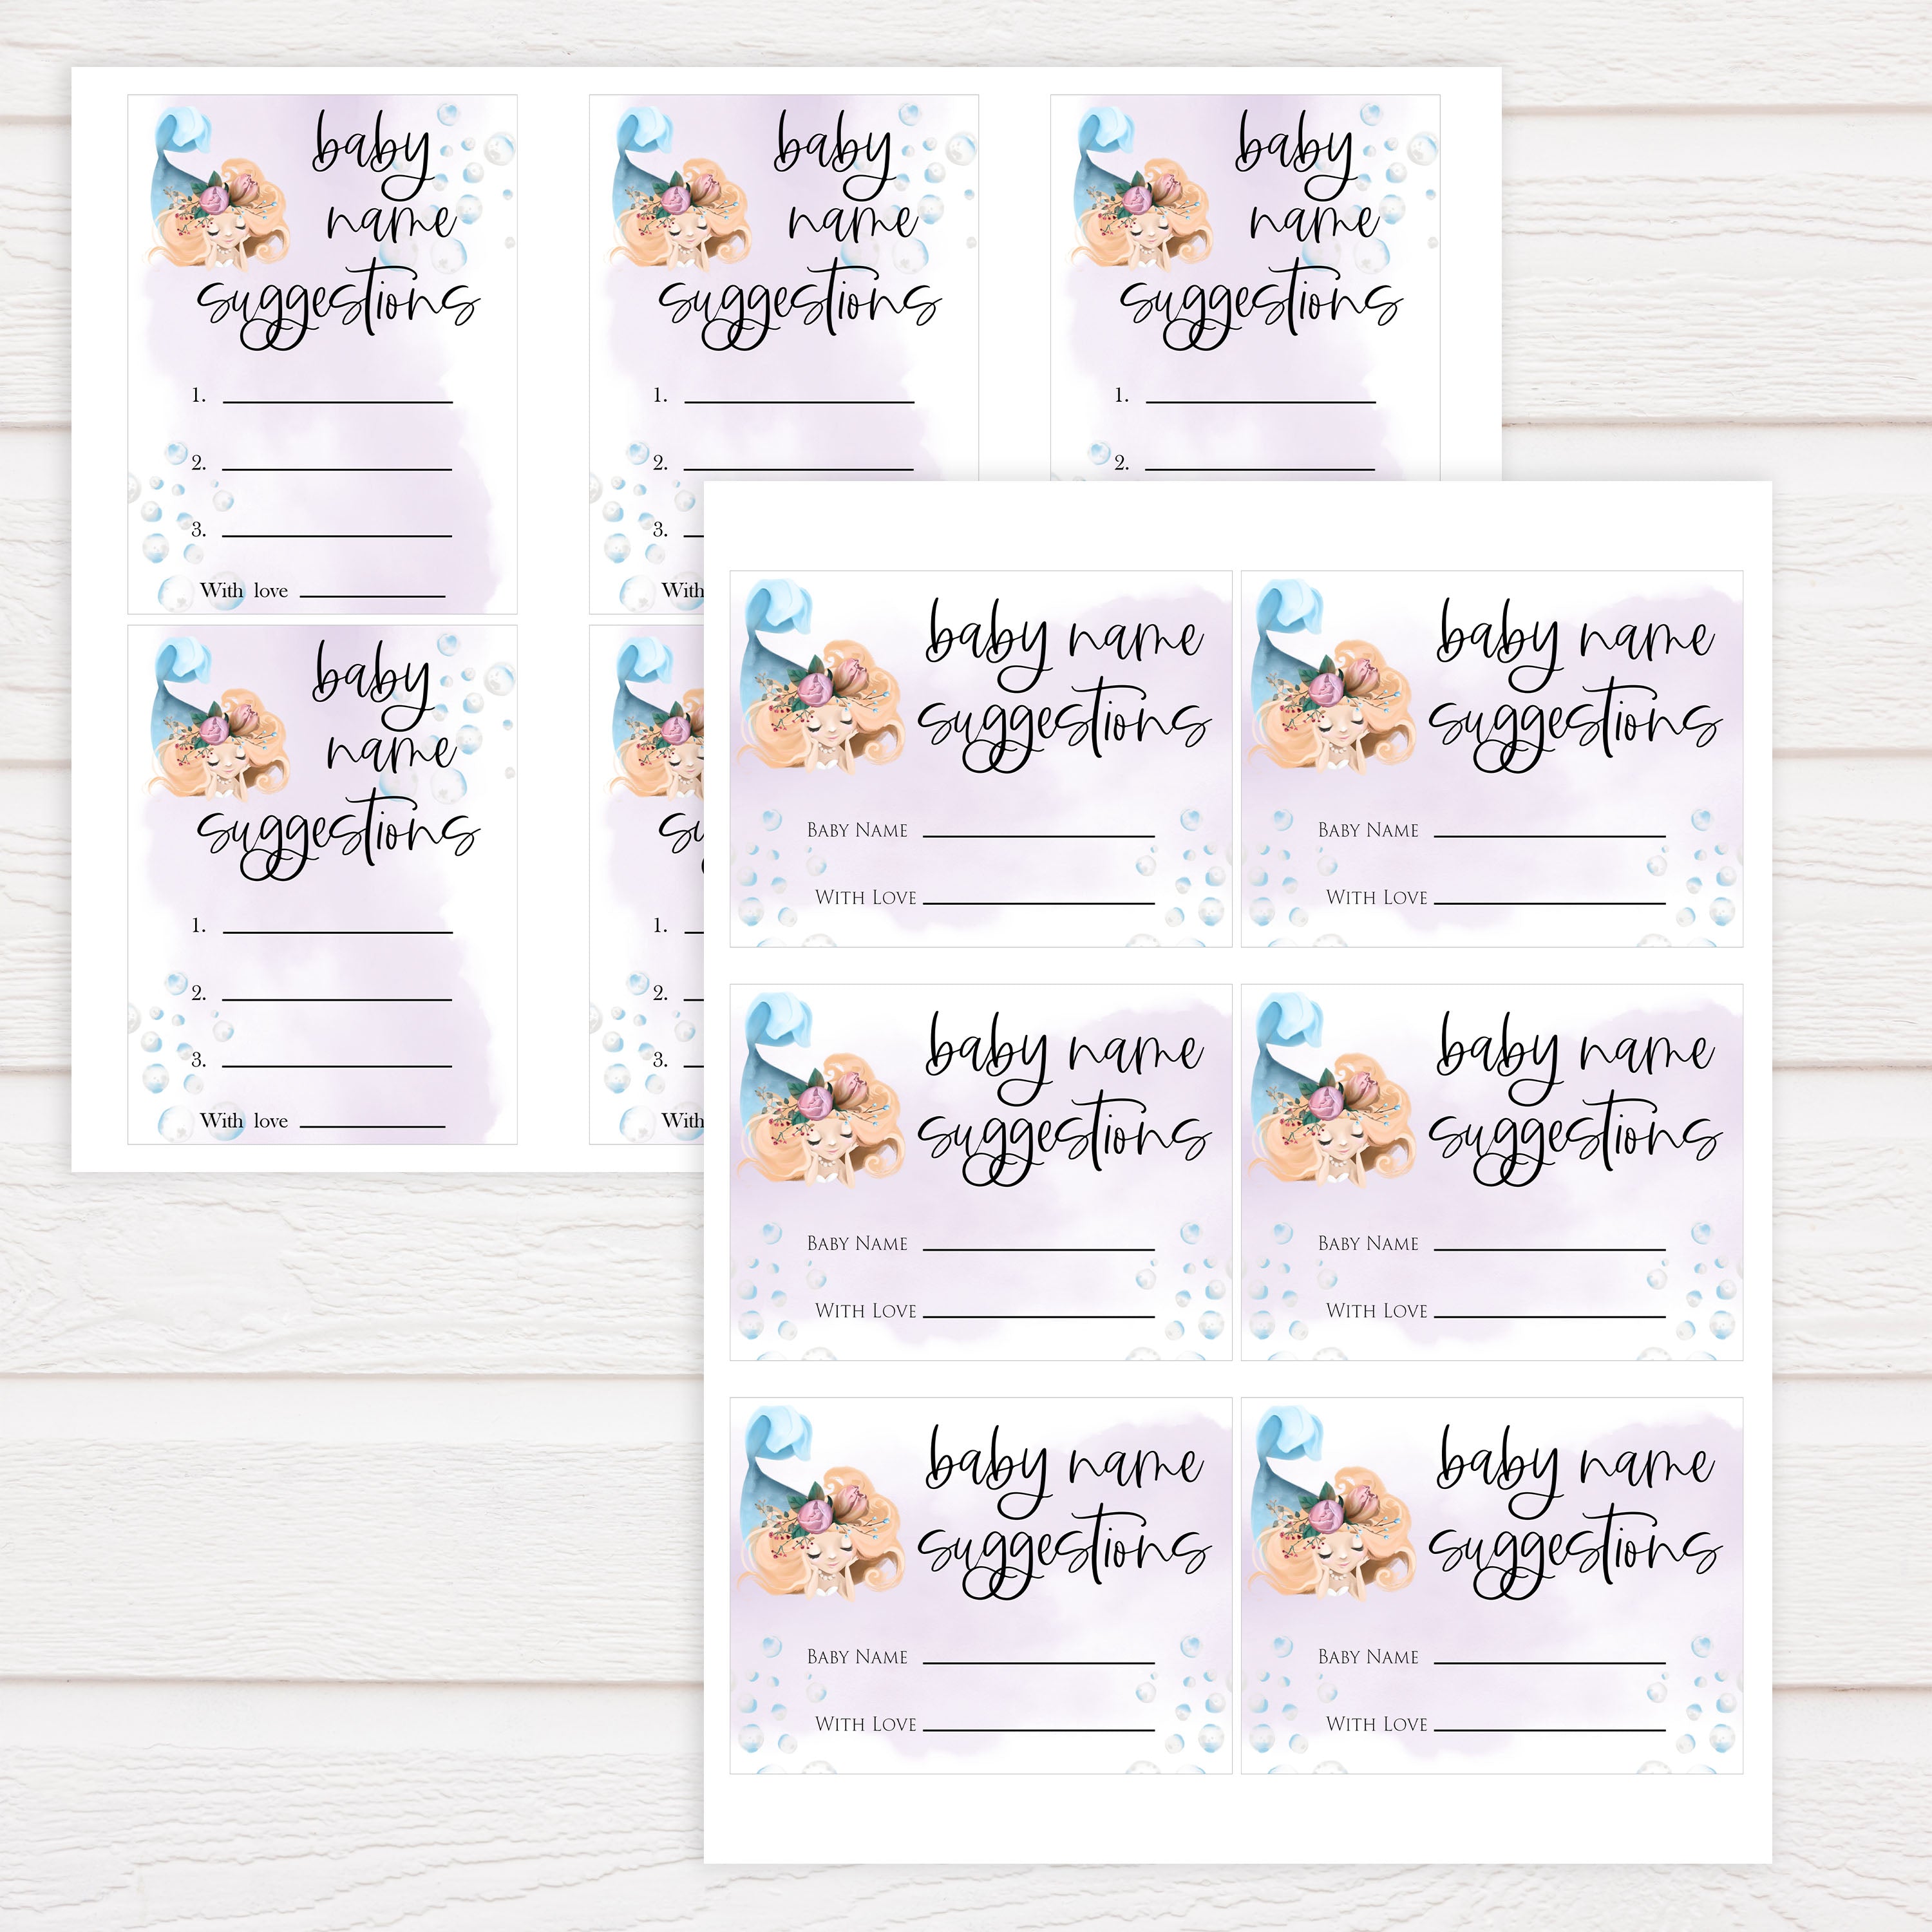 baby name suggestions game, Printable baby shower games, little mermaid baby games, baby shower games, fun baby shower ideas, top baby shower ideas, little mermaid baby shower, baby shower games, pink hearts baby shower ideas